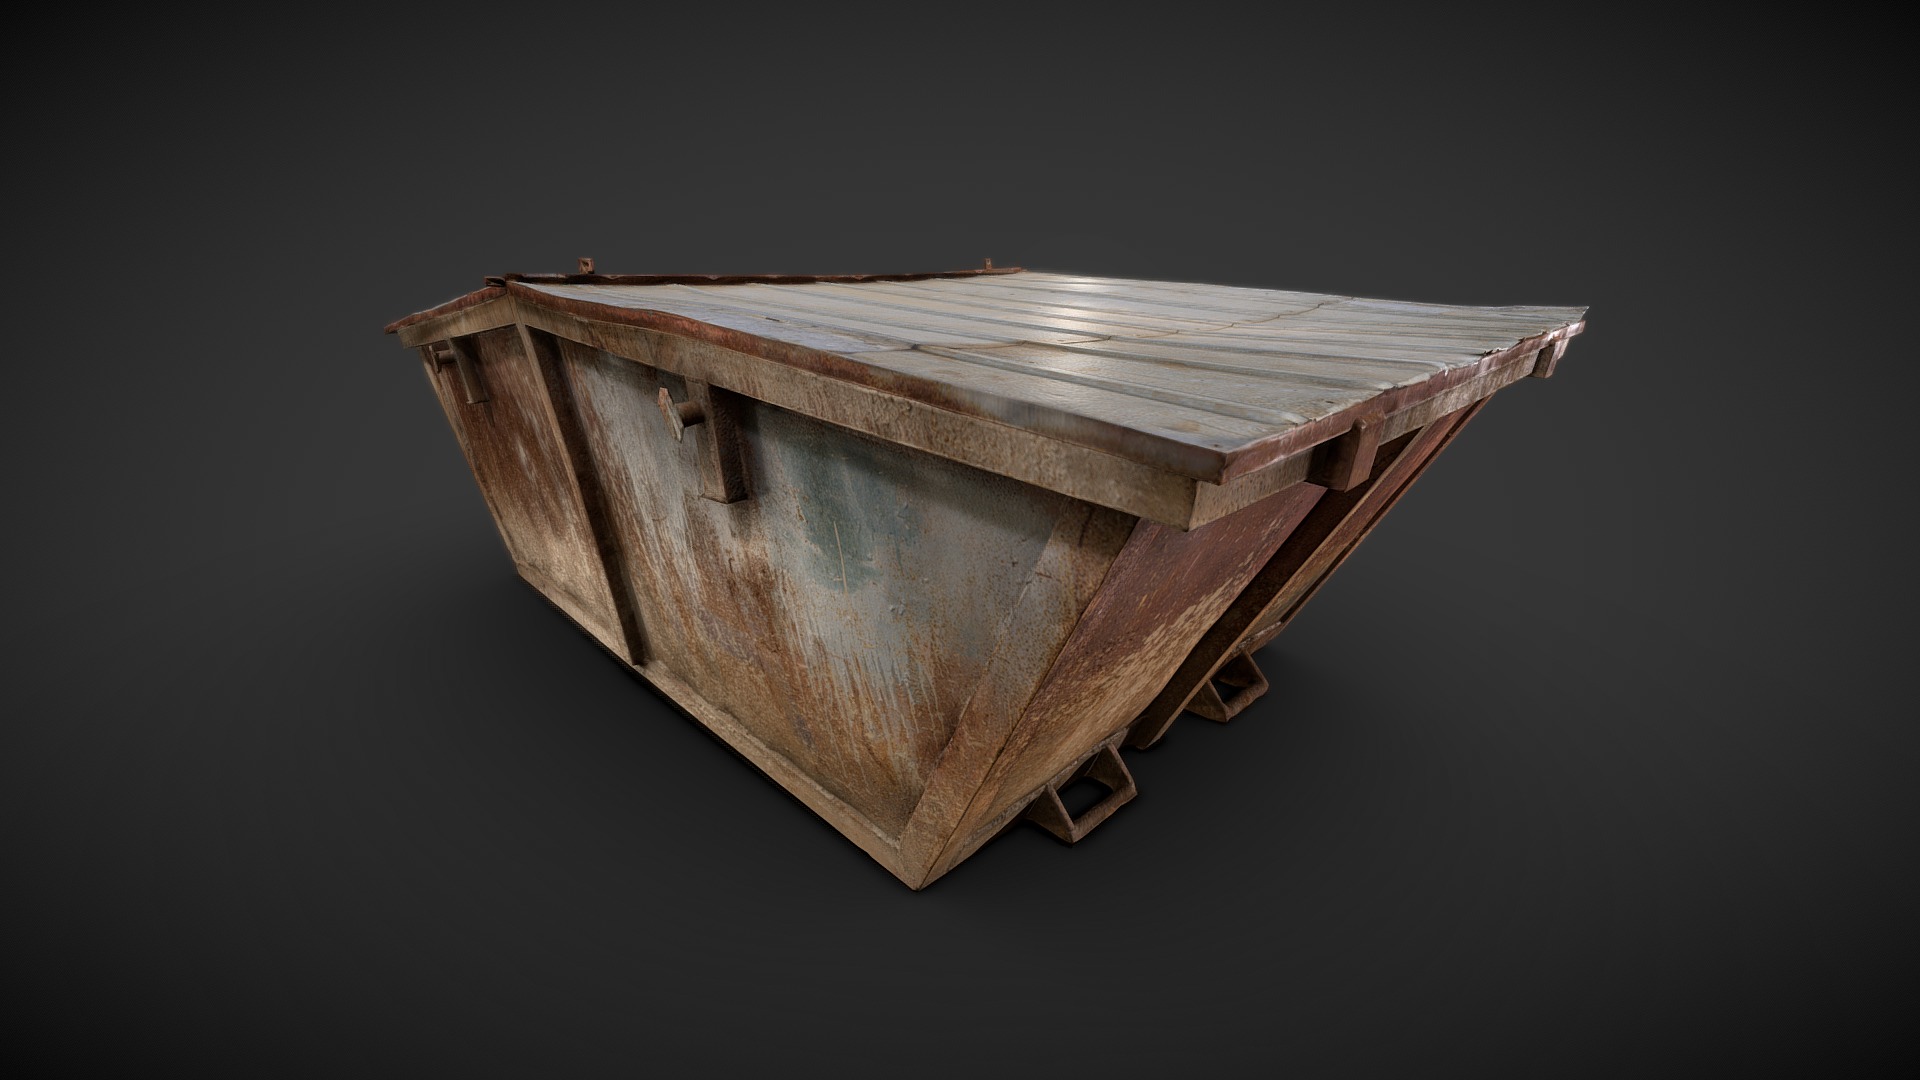 3D model Rusty Skip Container 3D scan - This is a 3D model of the Rusty Skip Container 3D scan. The 3D model is about a wooden box with a handle.